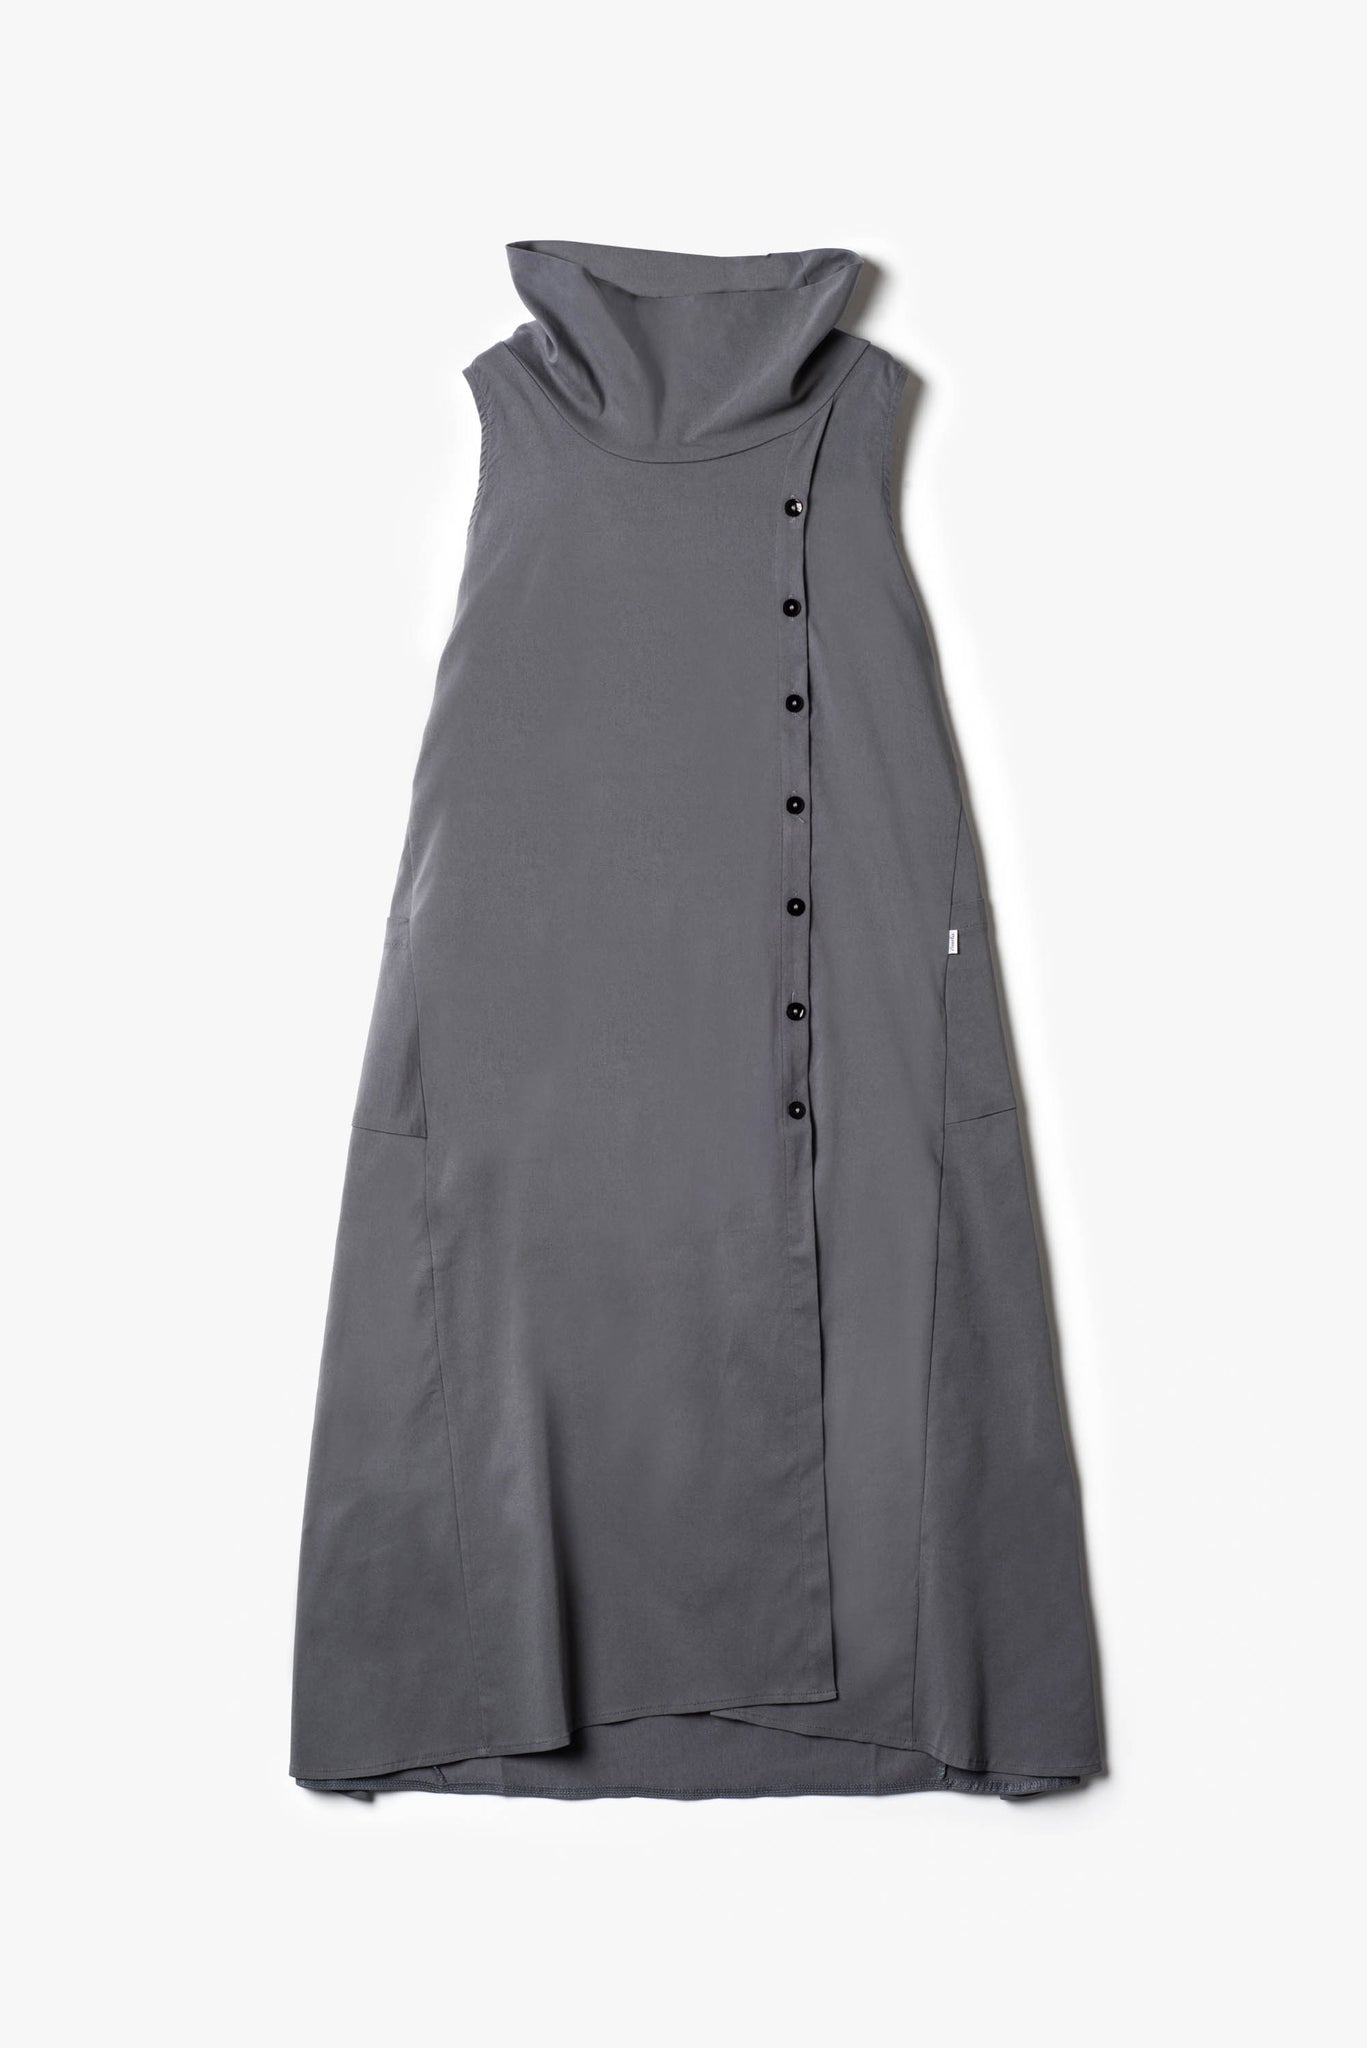 Sleeveless dress with buttons